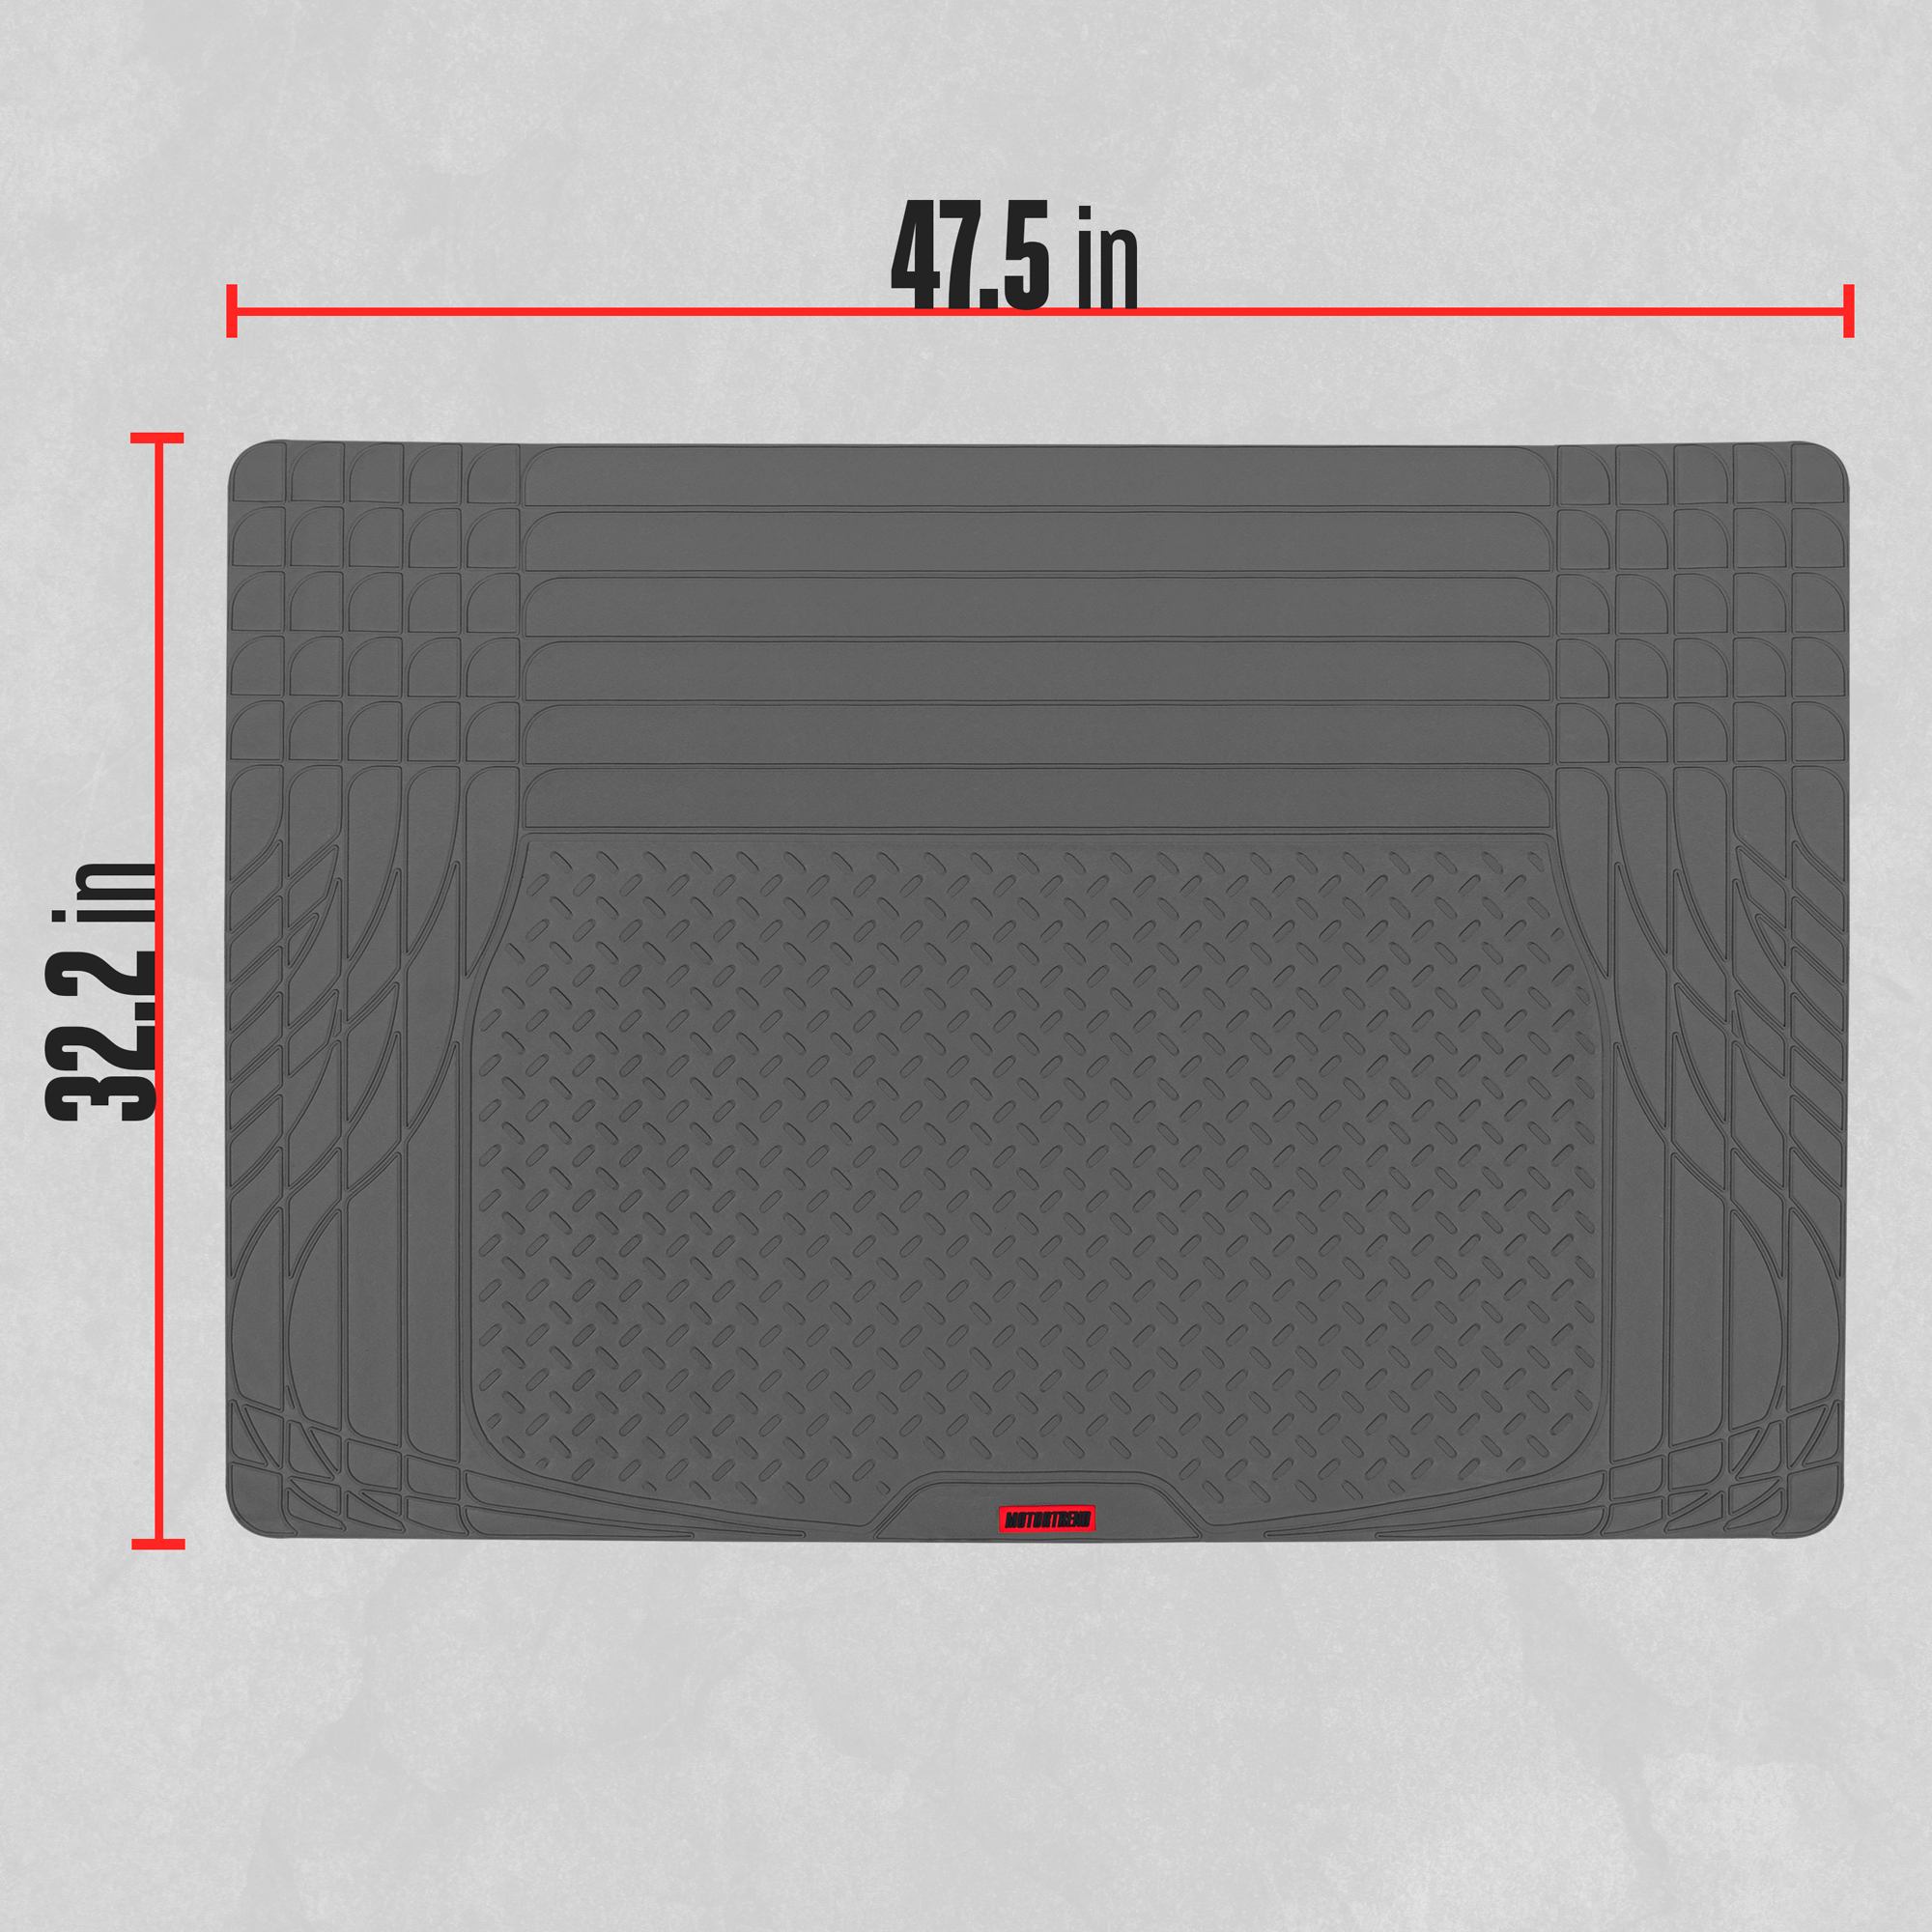 MotorTrend FlexTough TrunkShield Car Mat for Back of SUV, Sedan  Coupe  Trunk Cargo Liner Cover, All Weather Heavy Duty Protection, Universal  Trim-To-Fit, 47.5